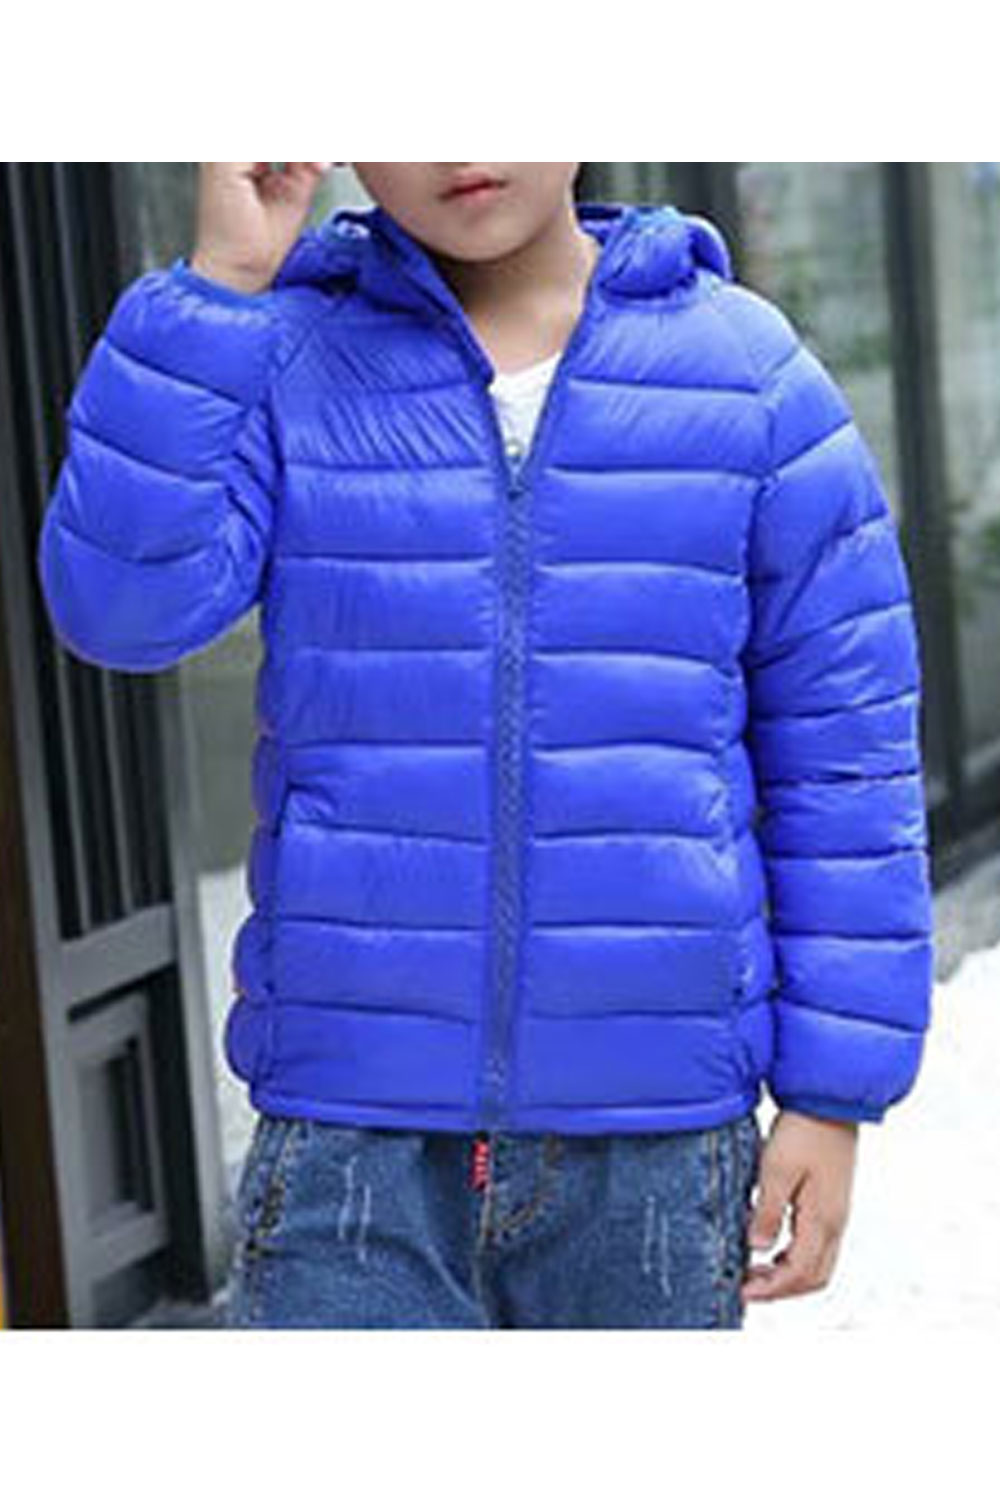 Zara Beez Kids Boys Lightweight Superb Solid Colored Long Sleeve Hooded Neck Easy Zipper Closure Warm Casual Padded Jacket